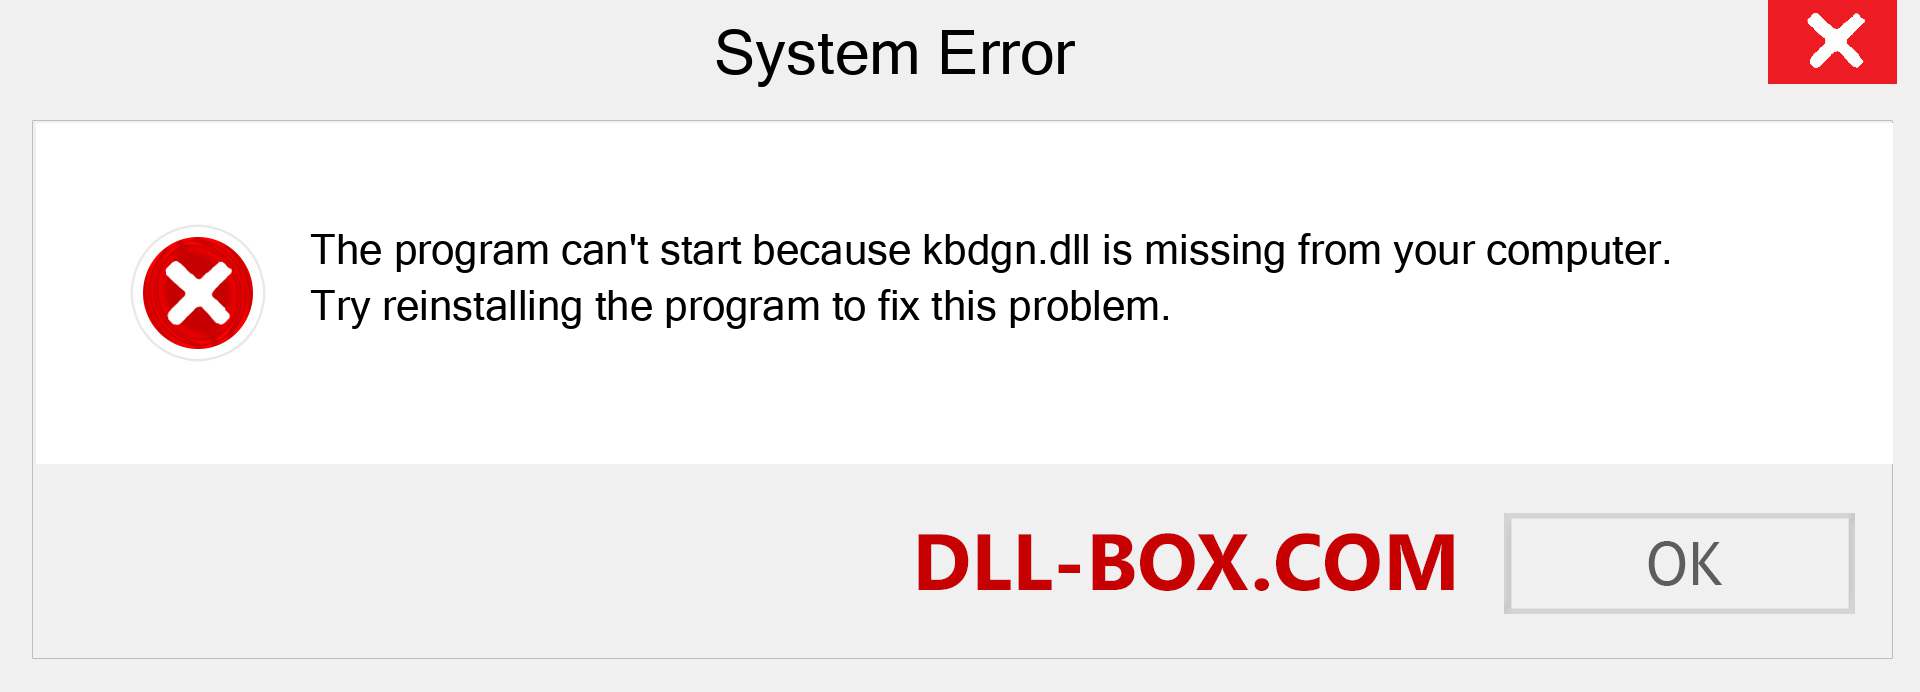  kbdgn.dll file is missing?. Download for Windows 7, 8, 10 - Fix  kbdgn dll Missing Error on Windows, photos, images